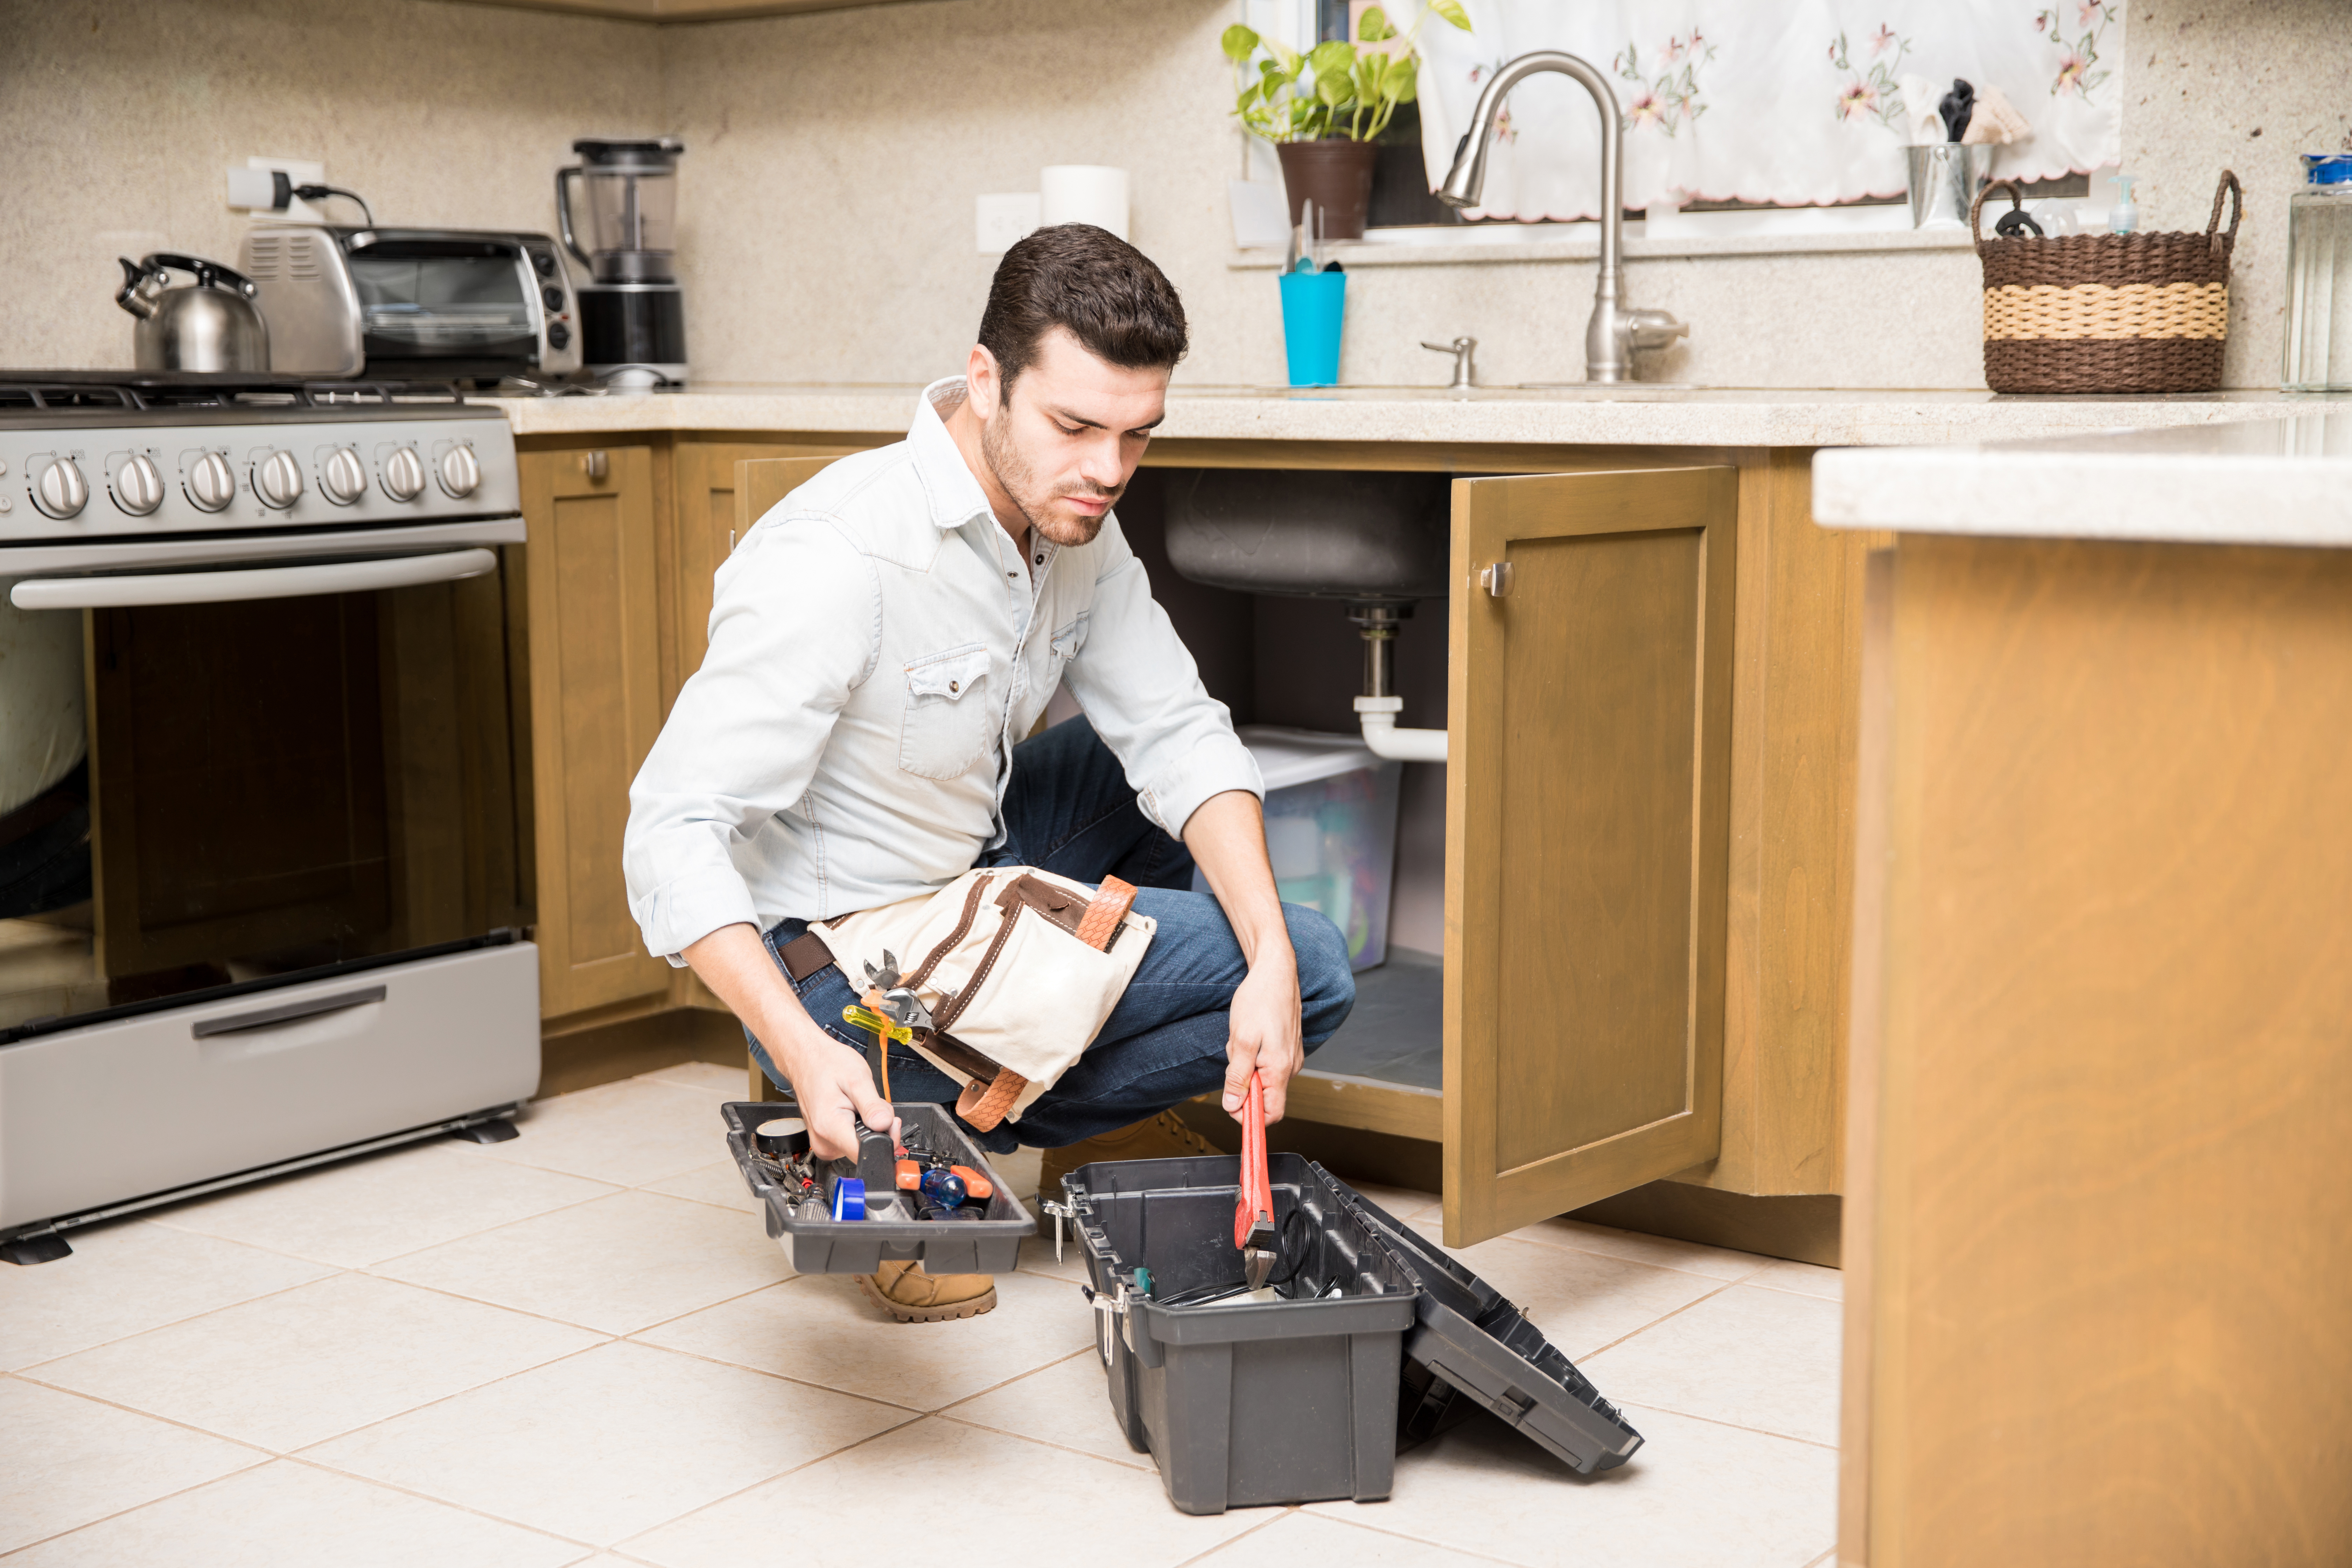 How to Prevent Clogged Drains in Your Willow Park Greens Home - Acosta Plumbing Solutions